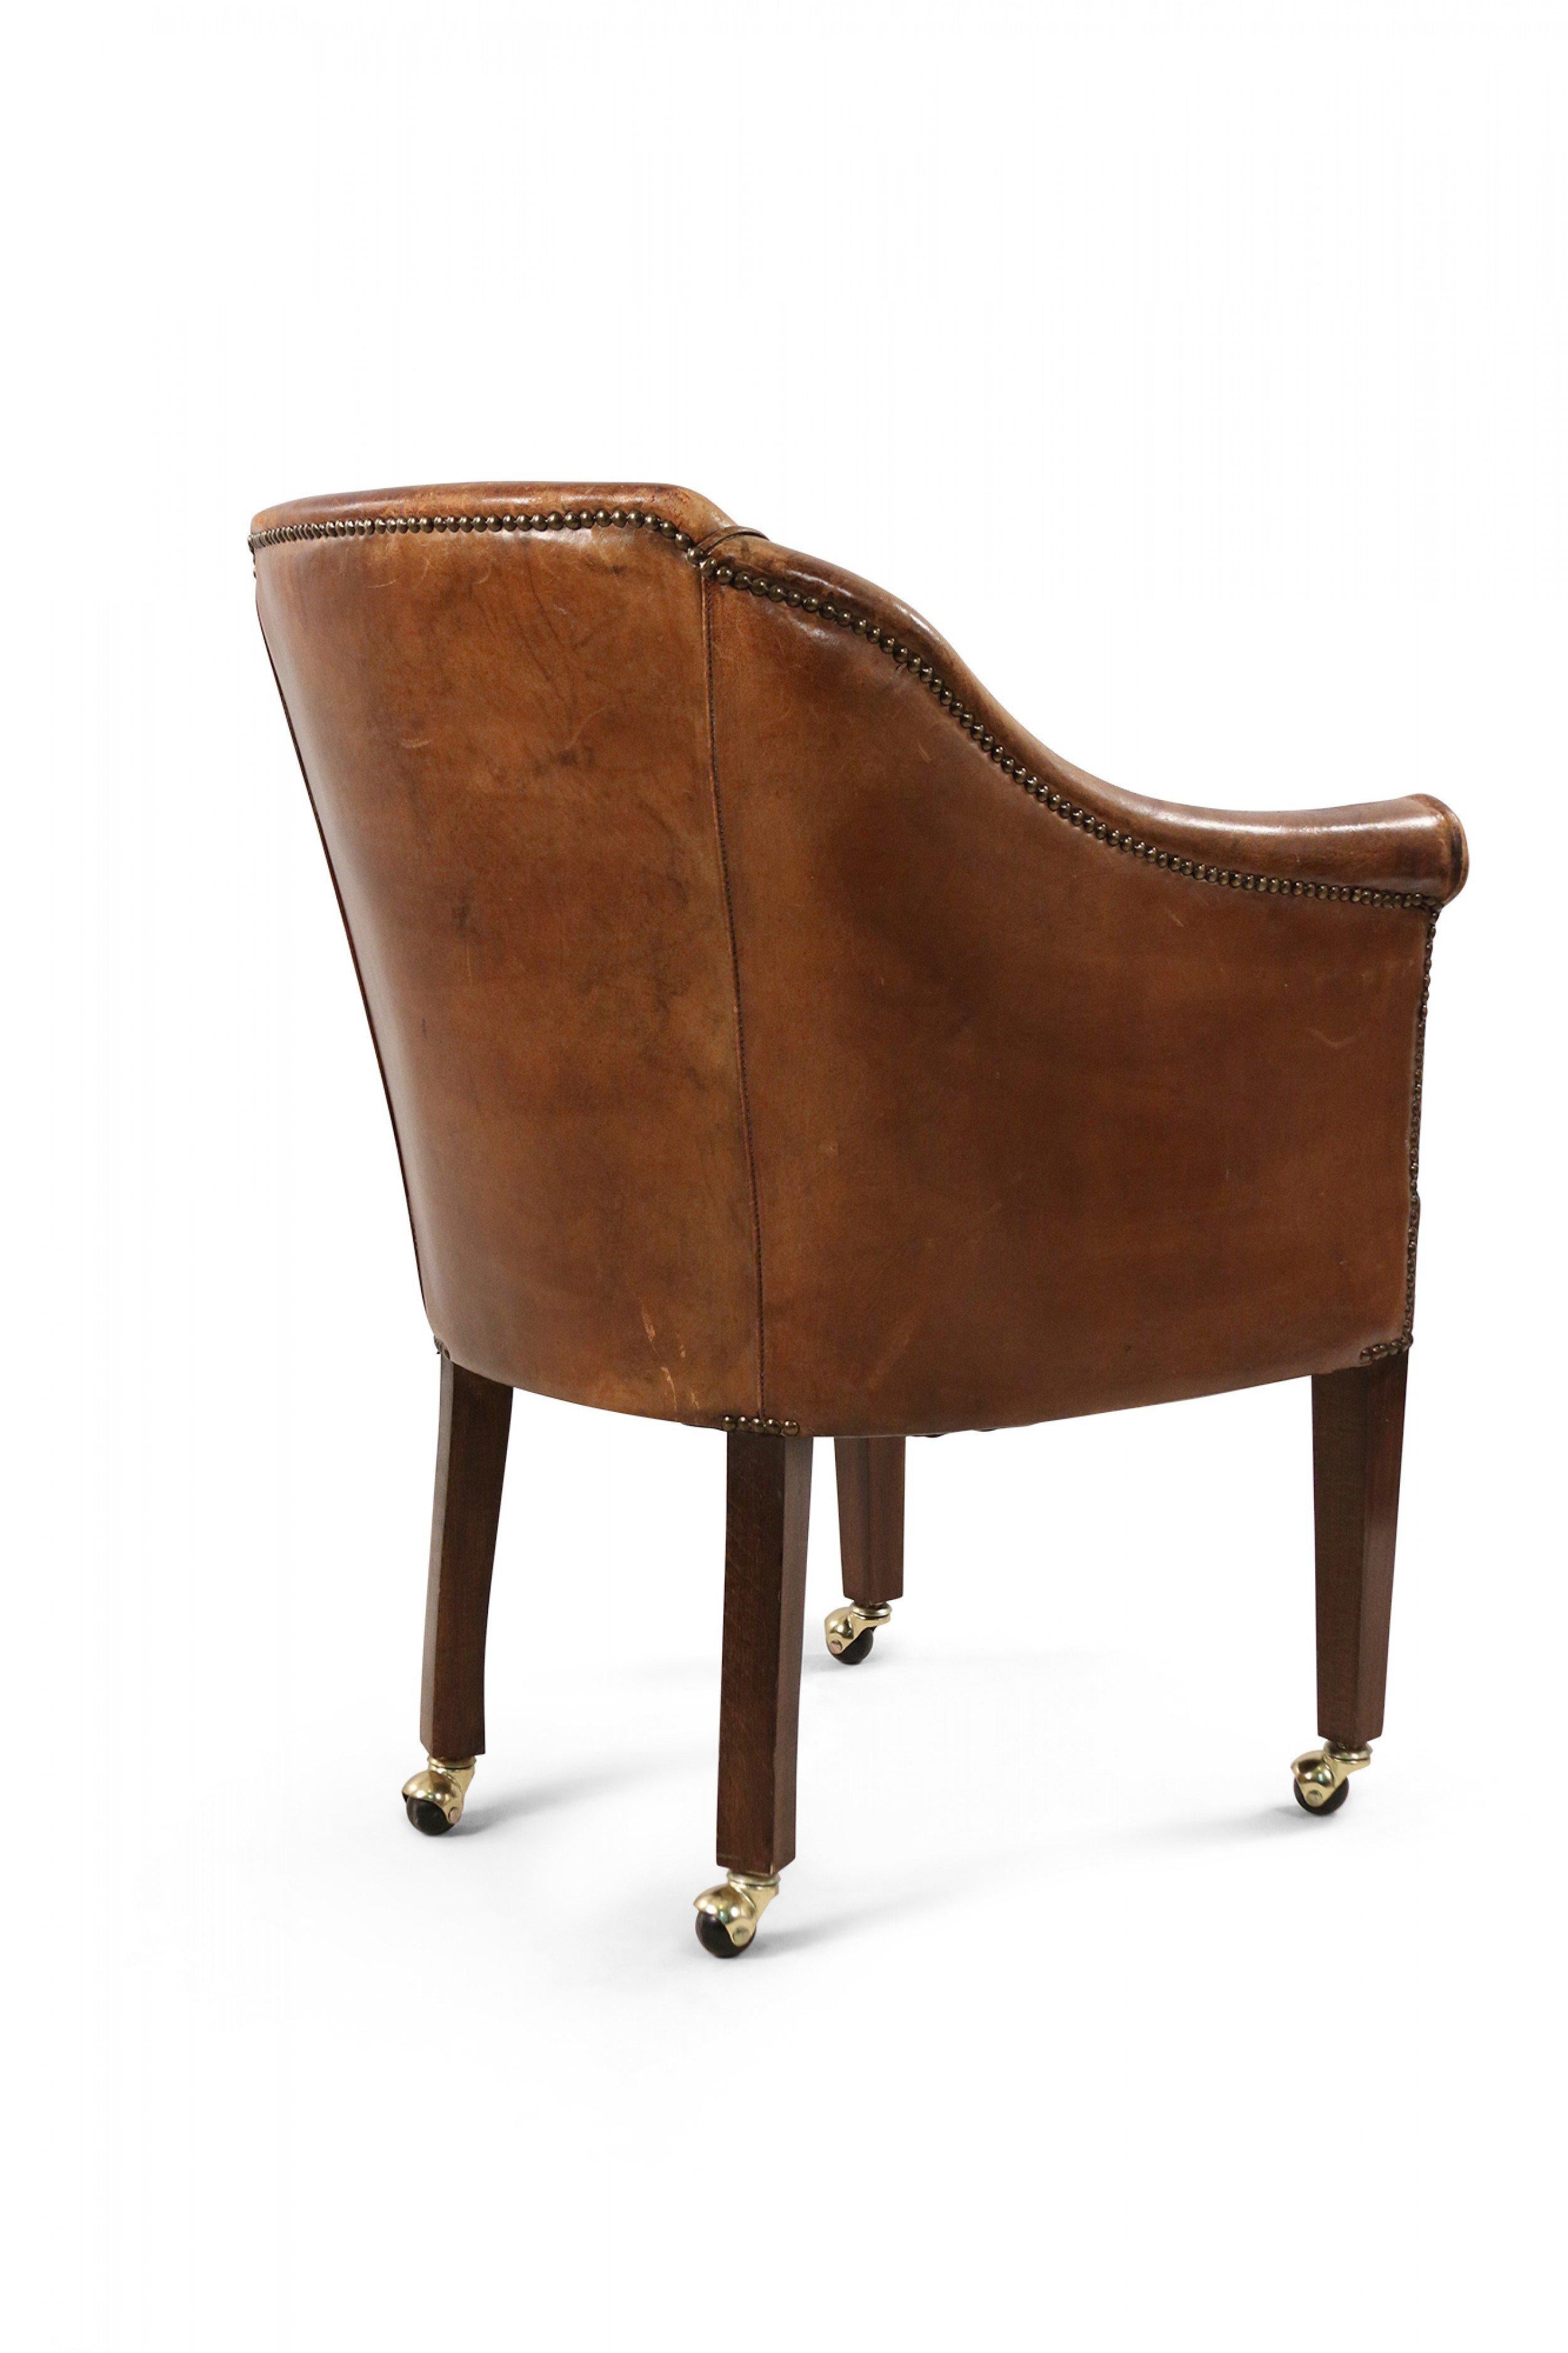 20th Century English Georgian Style Brown Leather and Wood Rolling Armchair